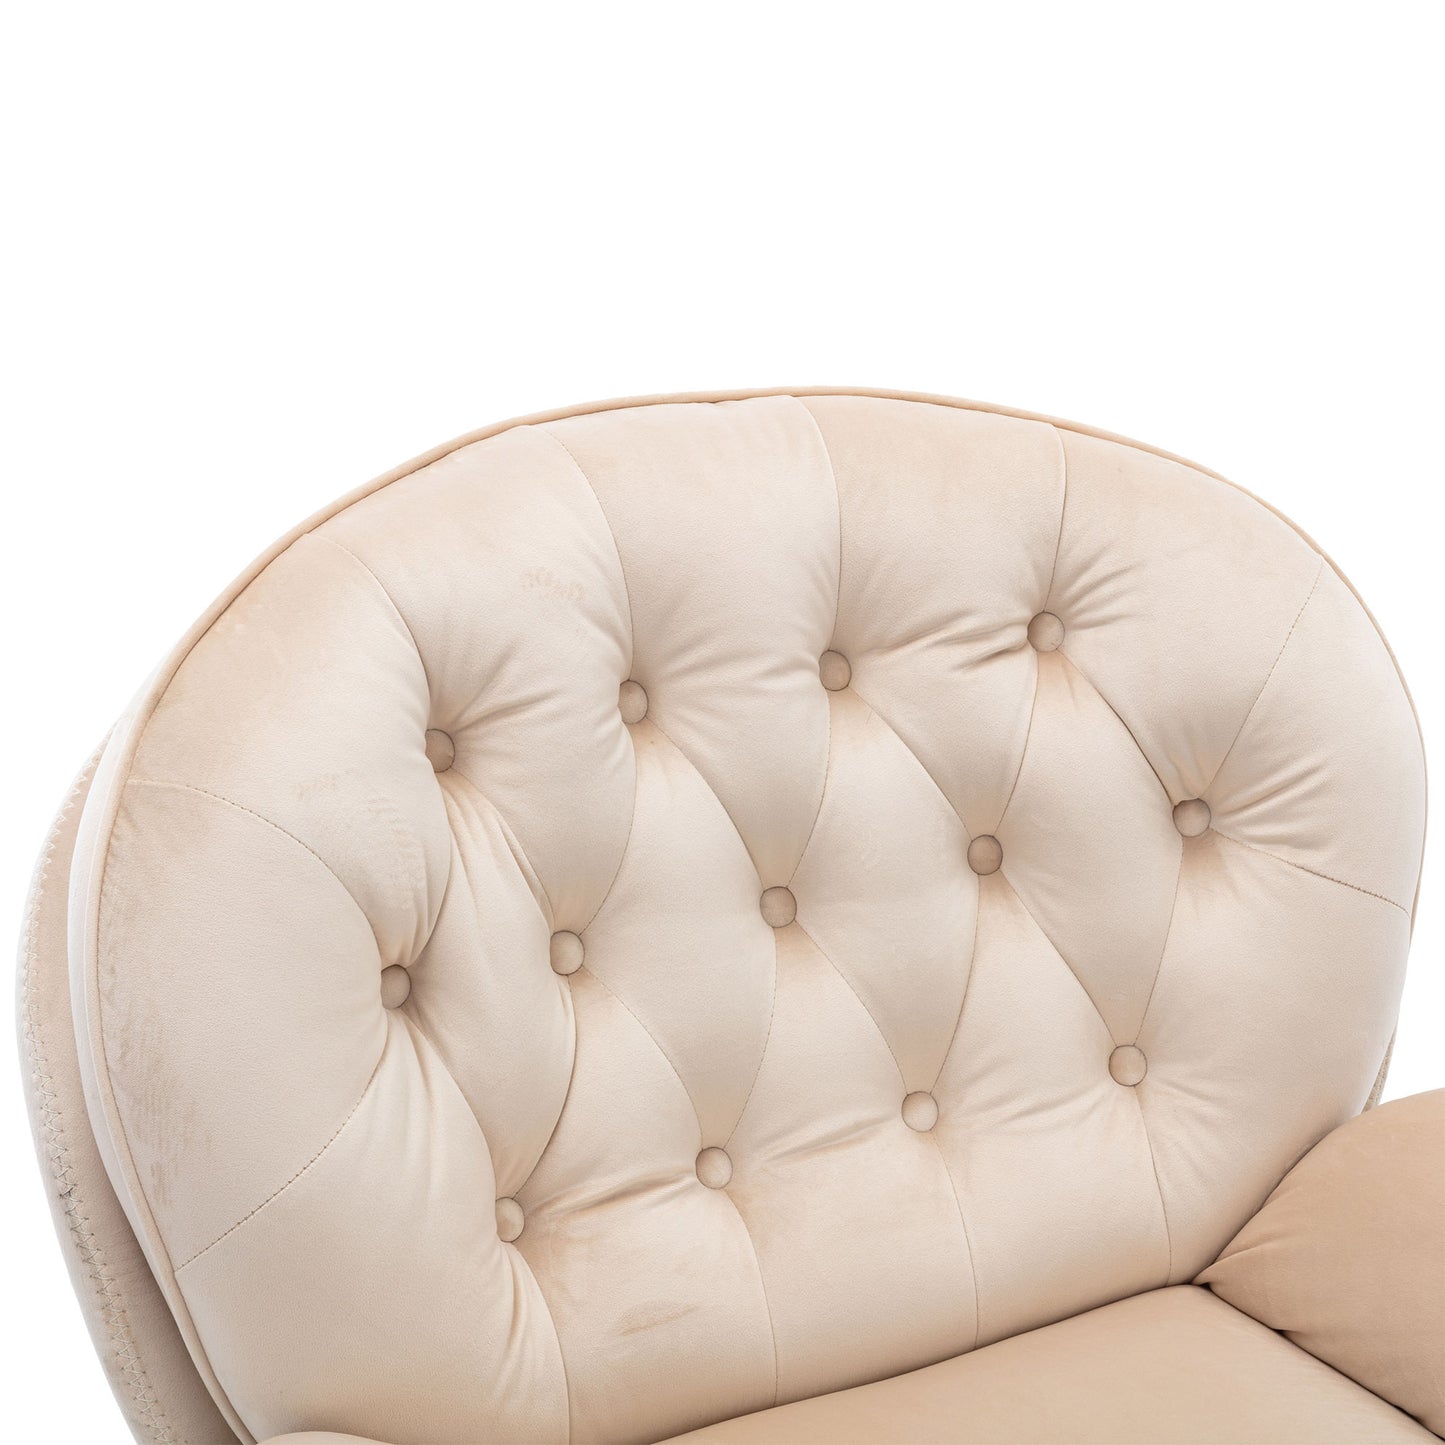 Marsh Beige Accent Chair with Ottoman